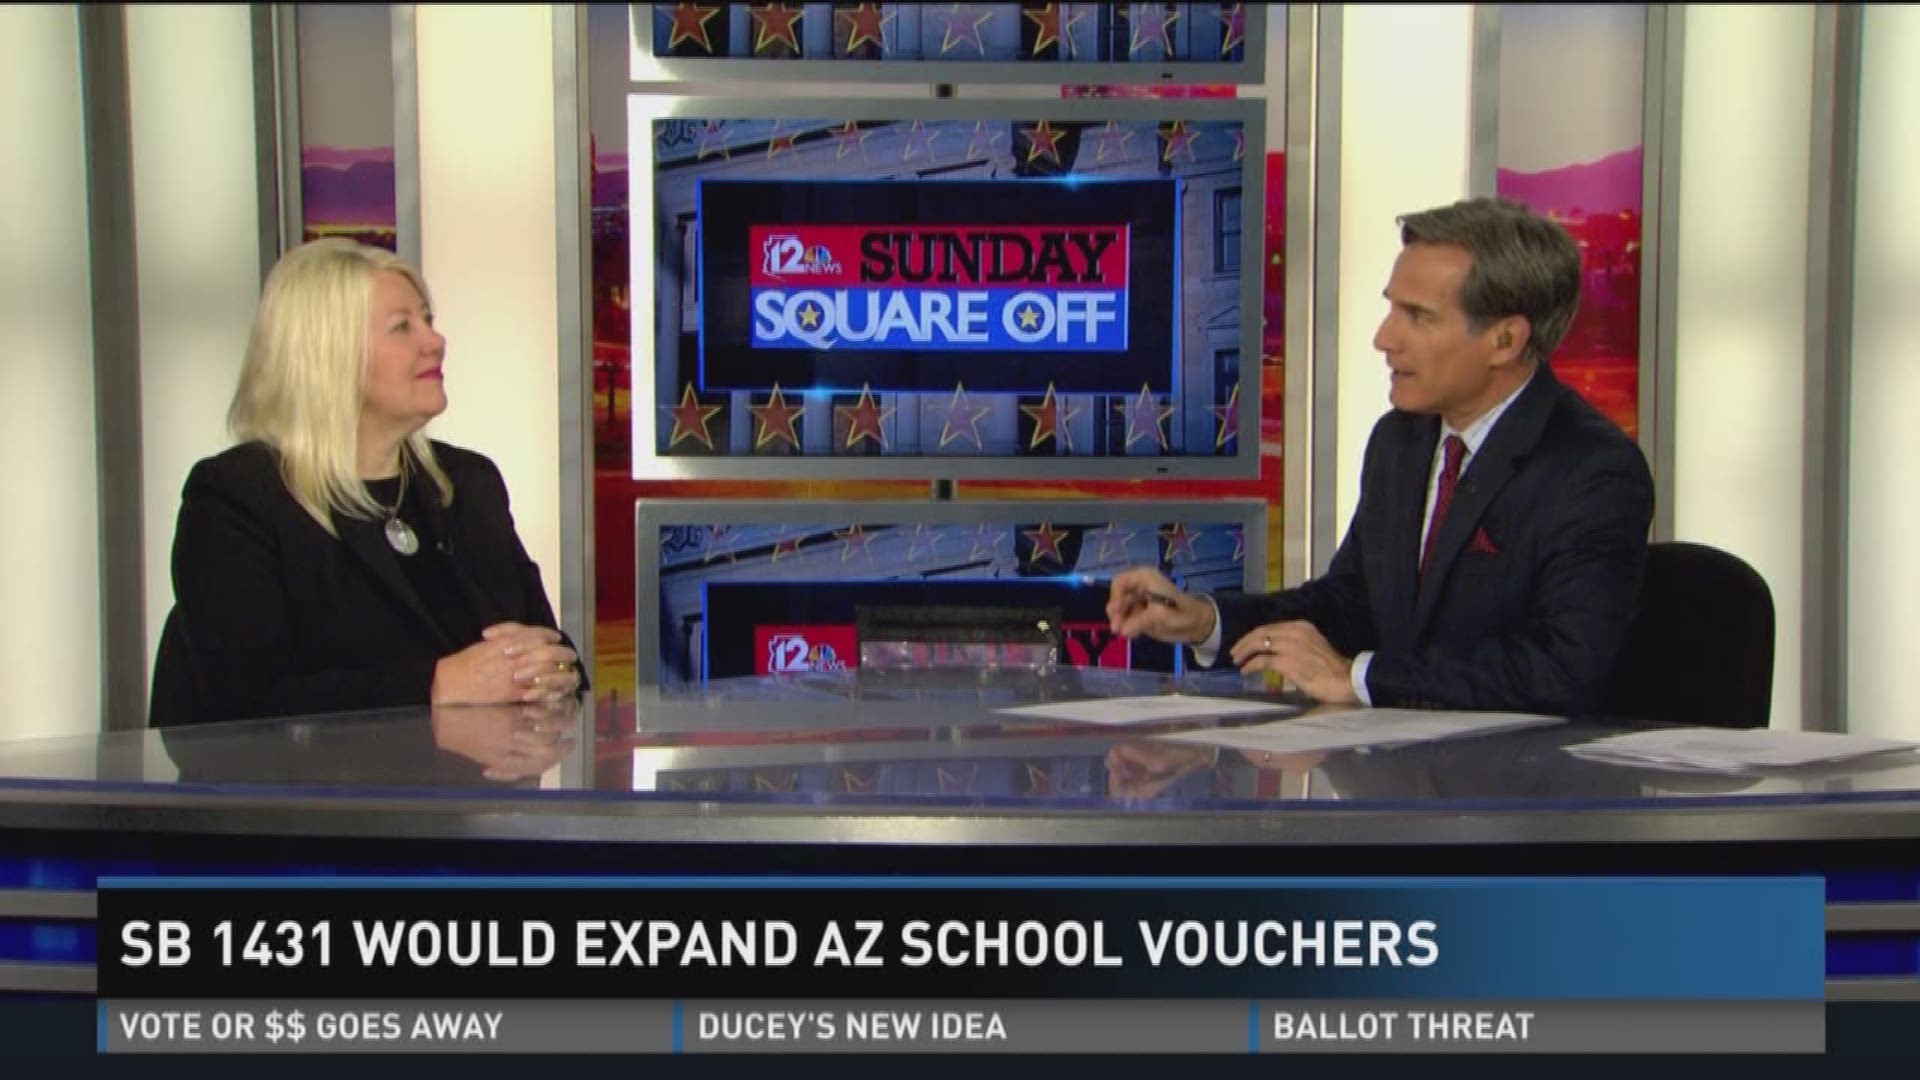 Arizona parents are demanding a universal voucher program that lets them spend tax dollars at private or parochial schools, according to a Republican state senator sponsoring a bill to do that. But a poll last fall doesn't back that up.